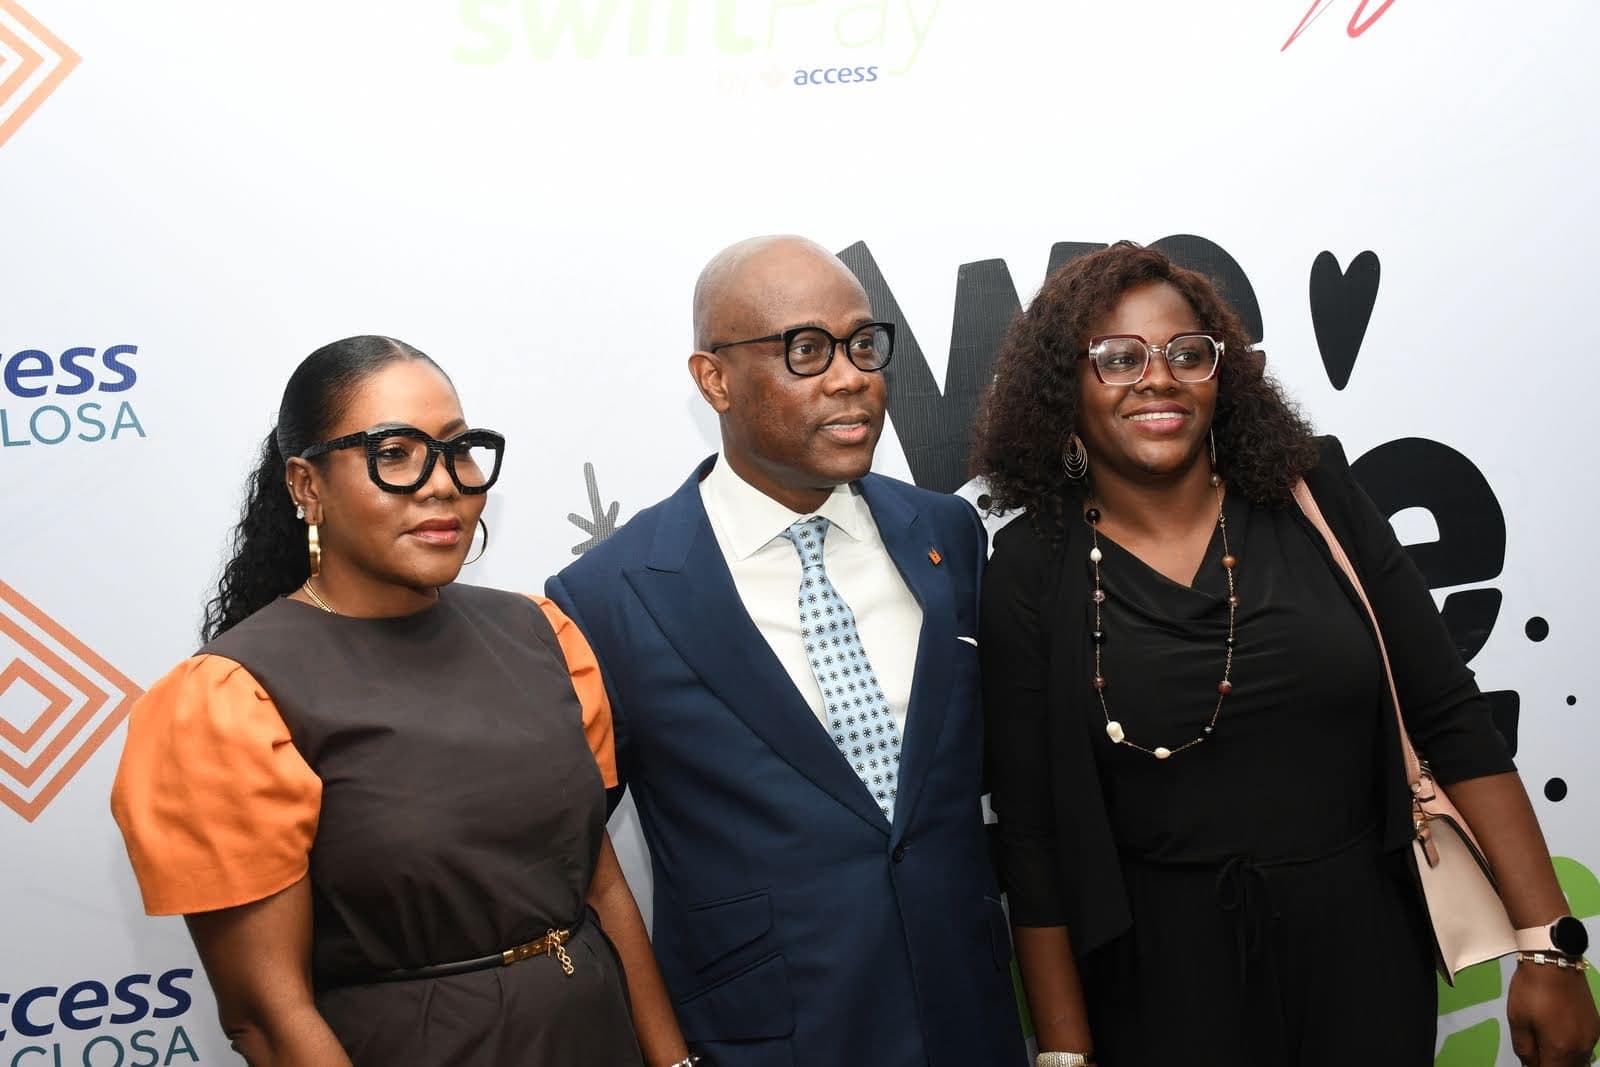 access bank engages SMEs customers